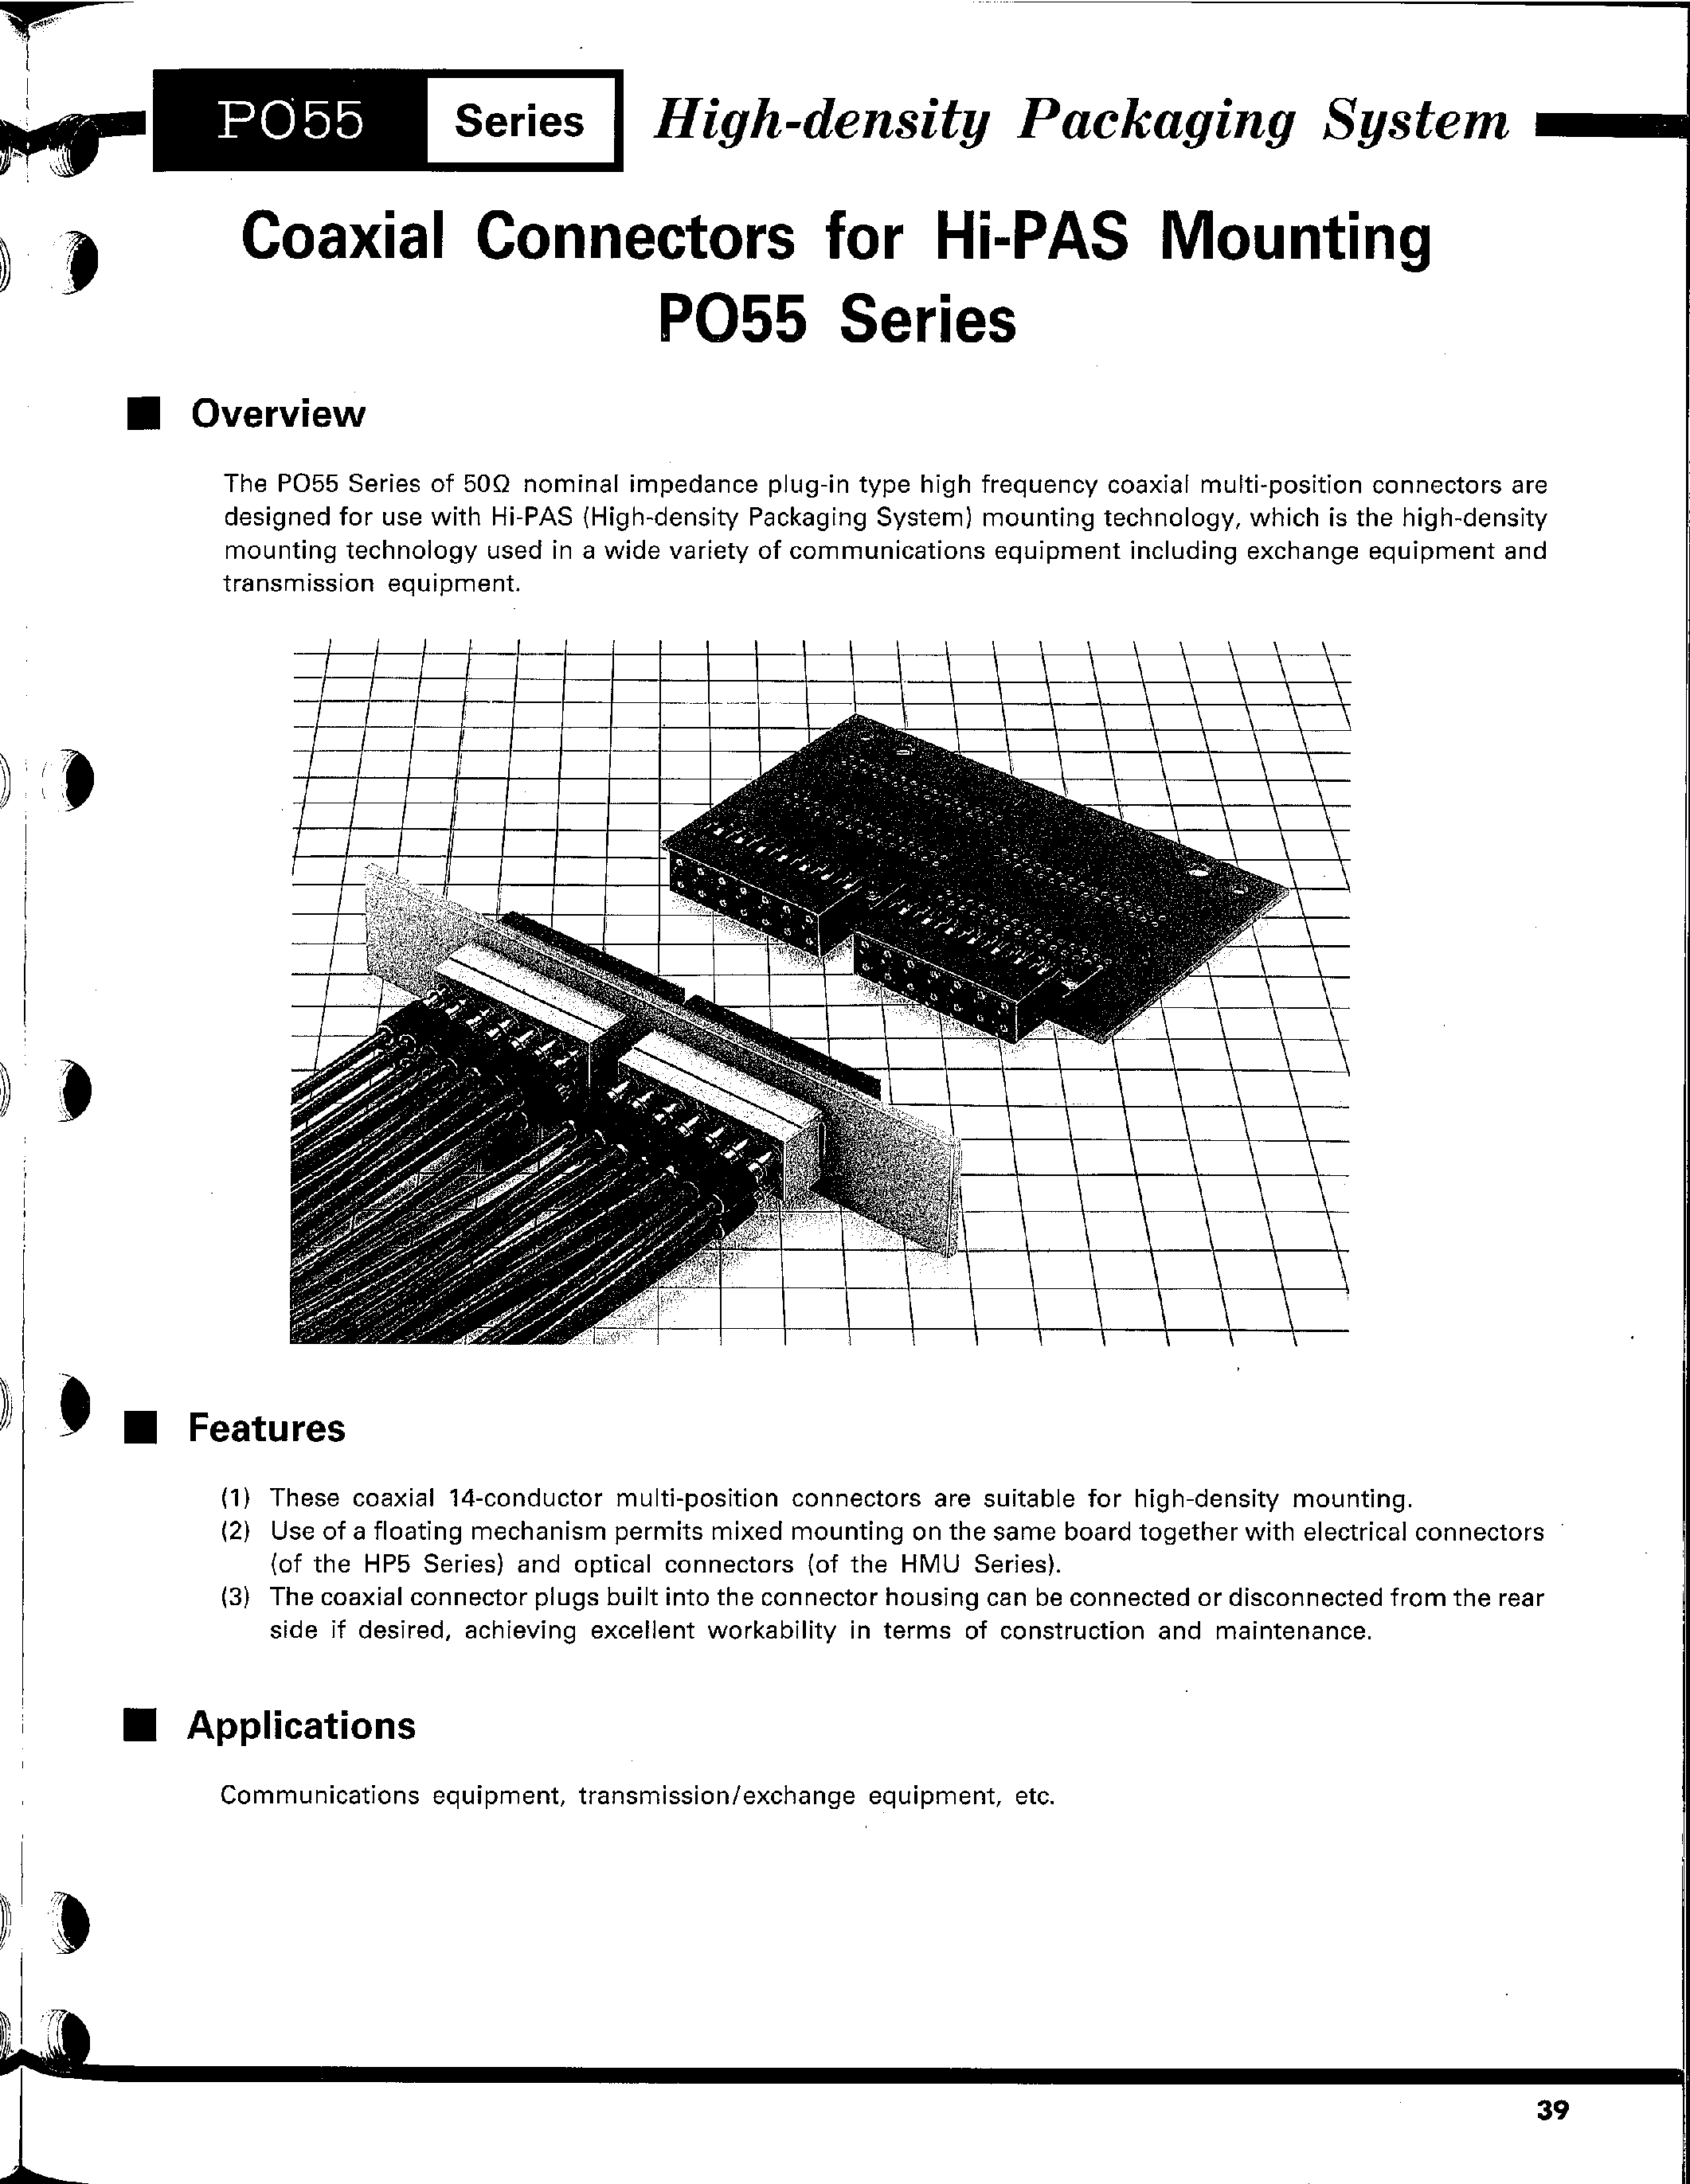 Datasheet PO55-P-316 - High-density Packaging System(Coaxial Connectors for Hi-PAS Mounting) page 1